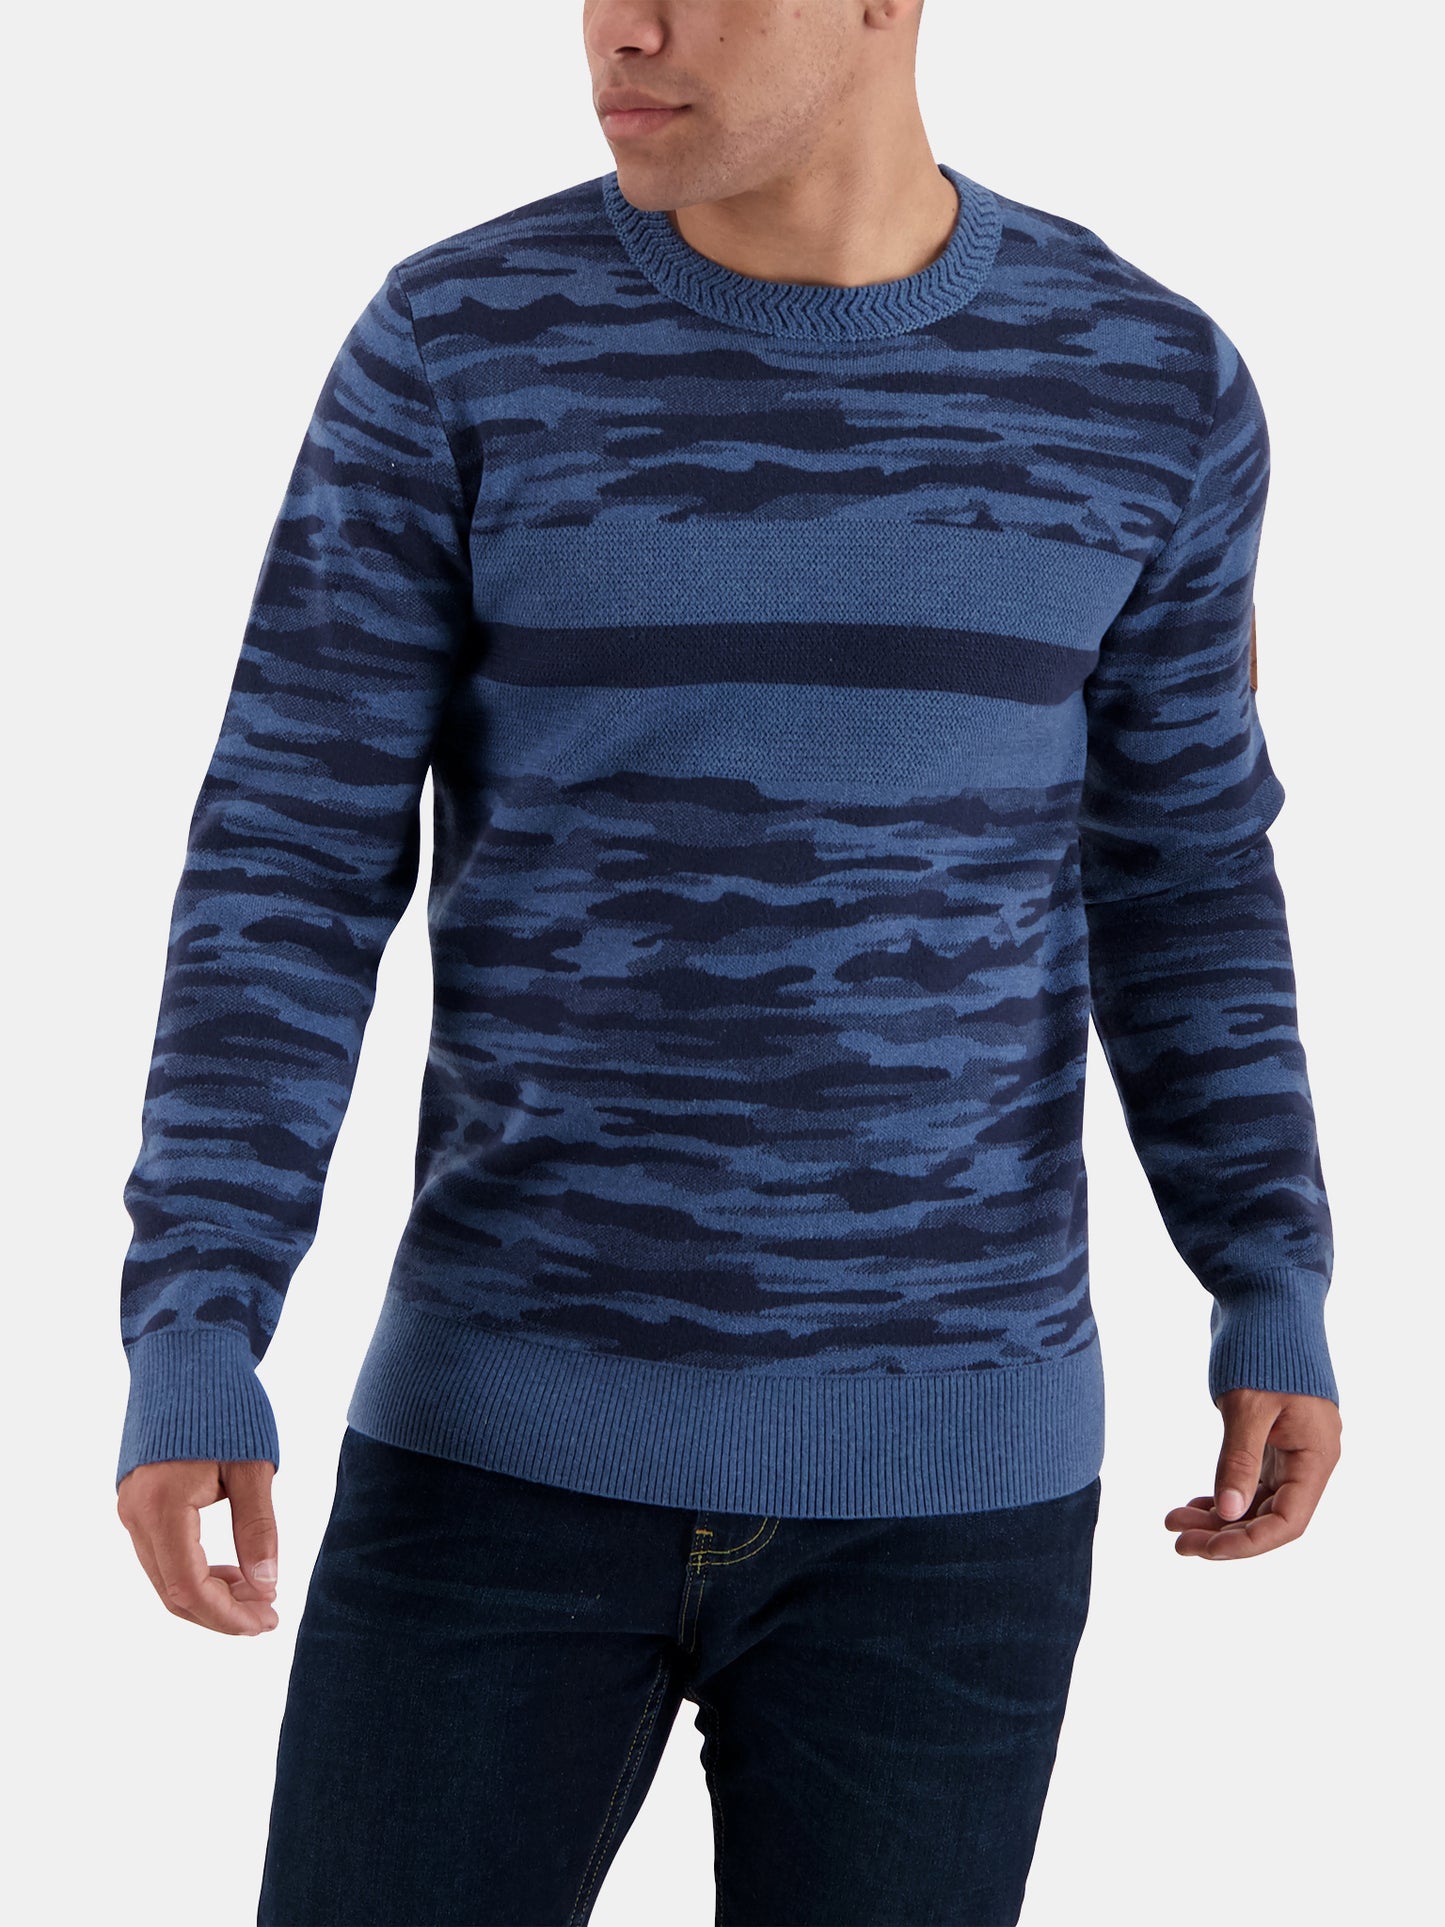 Obermeyer Men's Chase Camo Sweater